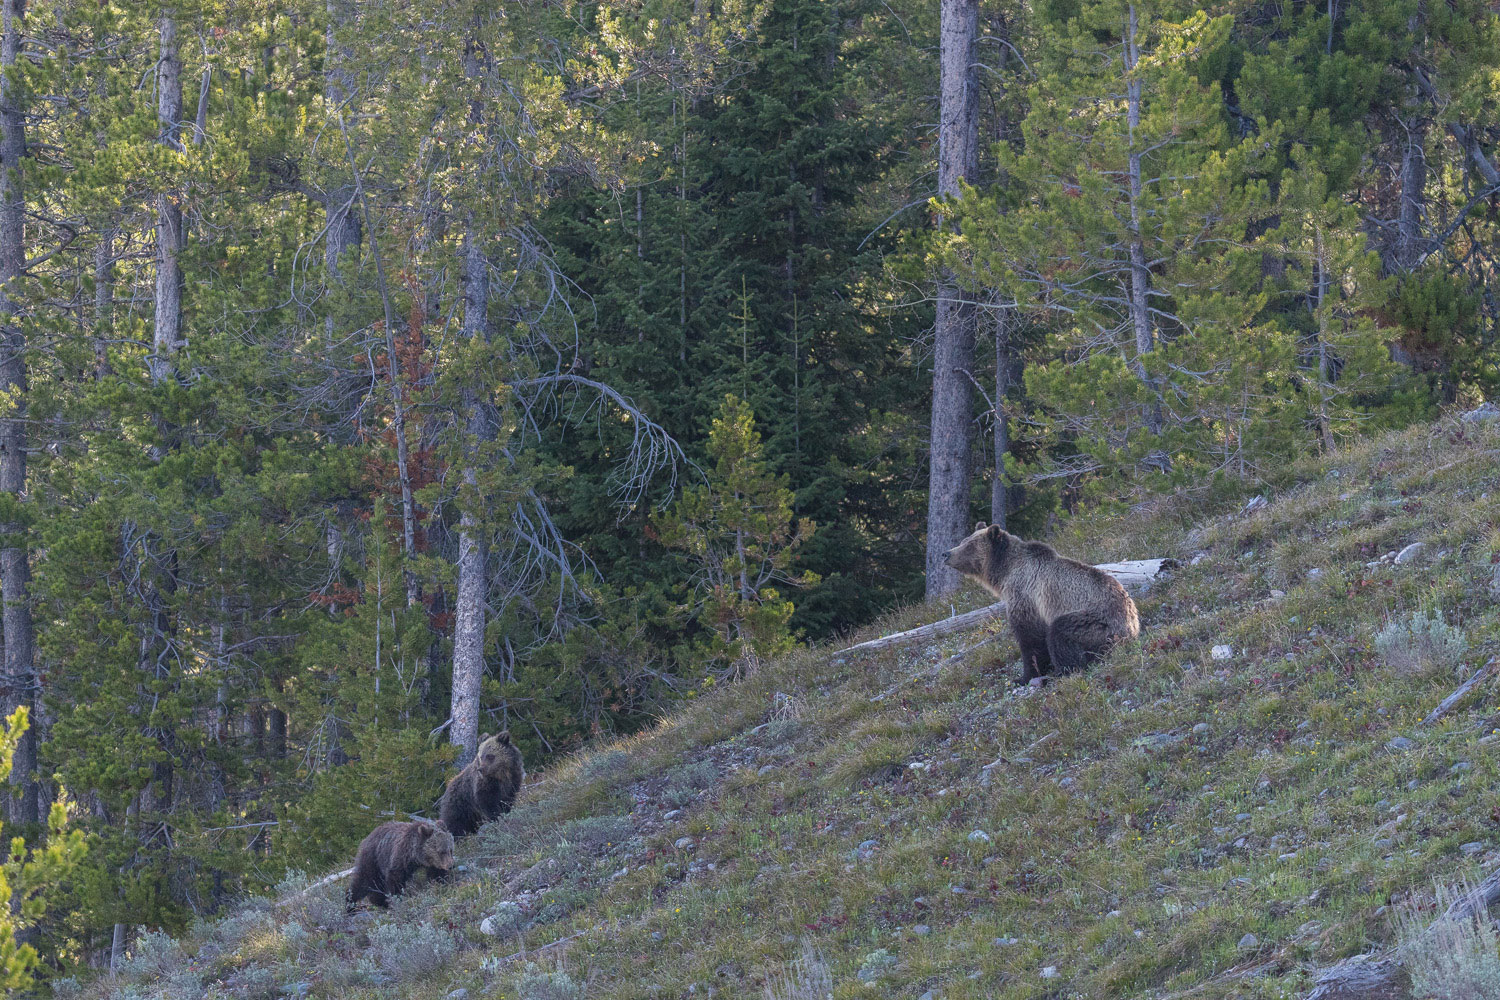 Girzzly Blondie leads her cubs from their home in the northern parts of Grand Teton National Park.  Spring is a time to replenish...